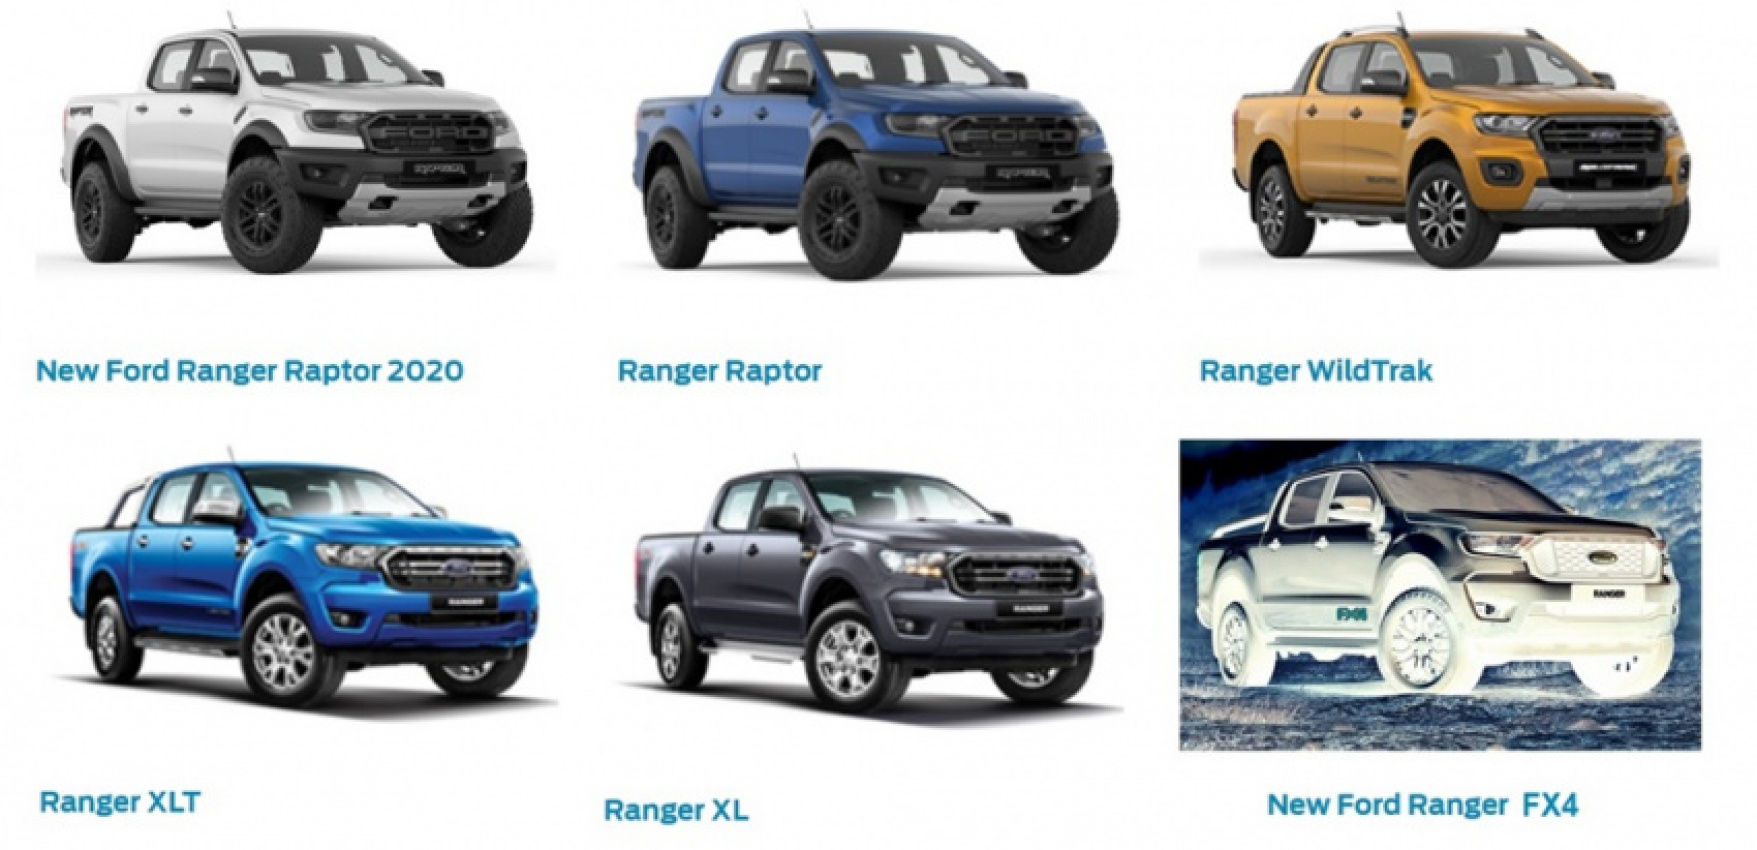 autos, cars, ford, ford ranger, ford ranger fx4, pick up truck, sime darby auto connexion, new ford ranger fx4 to be unveiled on june 3 and you’re invited to the launch event!